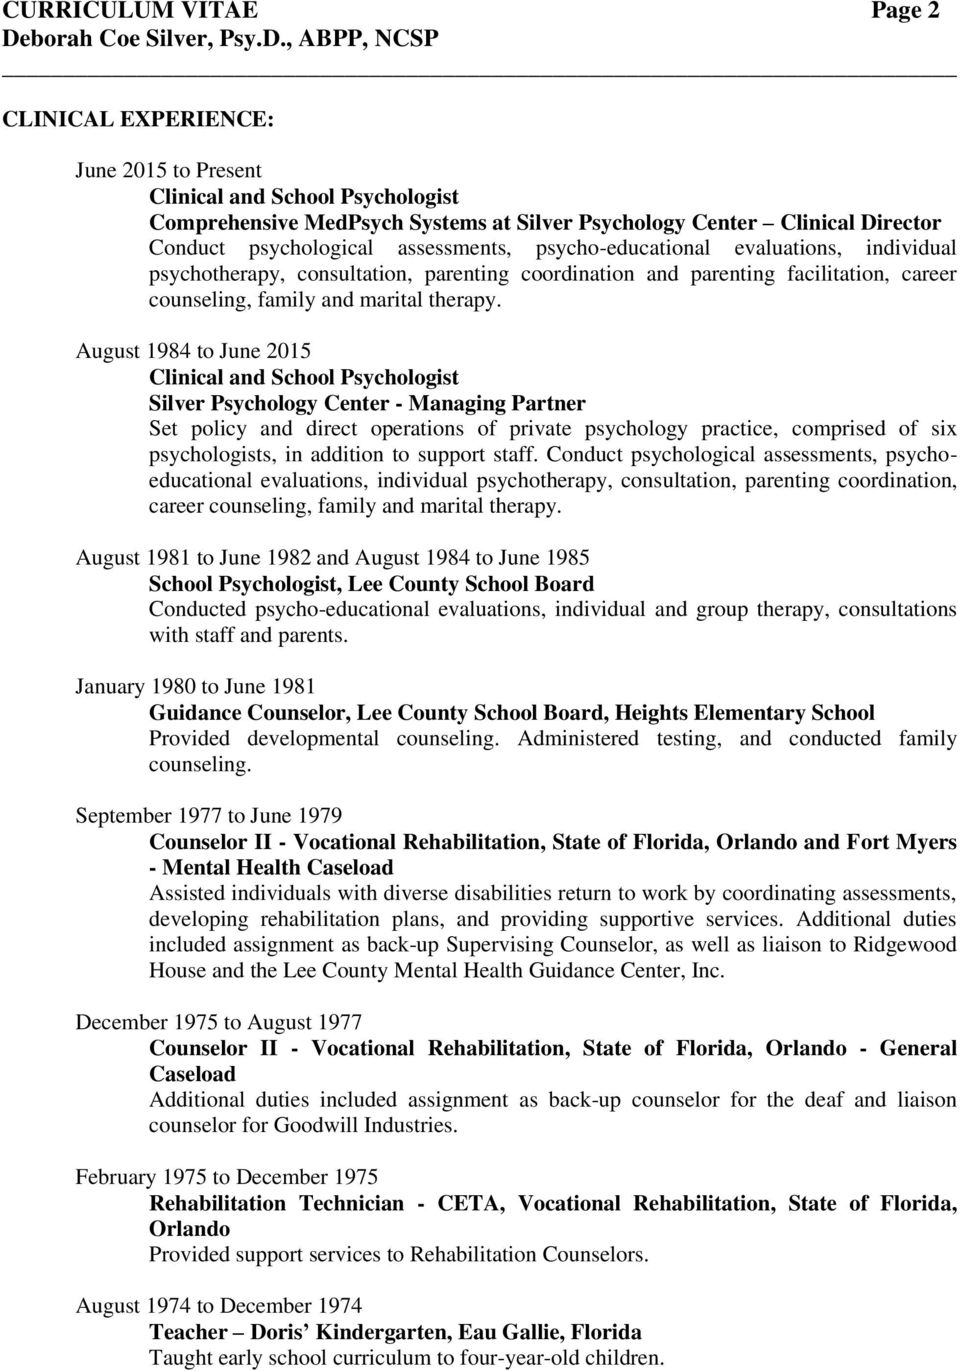 August 1984 to June 2015 Clinical and School Psychologist Silver Psychology Center - Managing Partner Set policy and direct operations of private psychology practice, comprised of six psychologists,